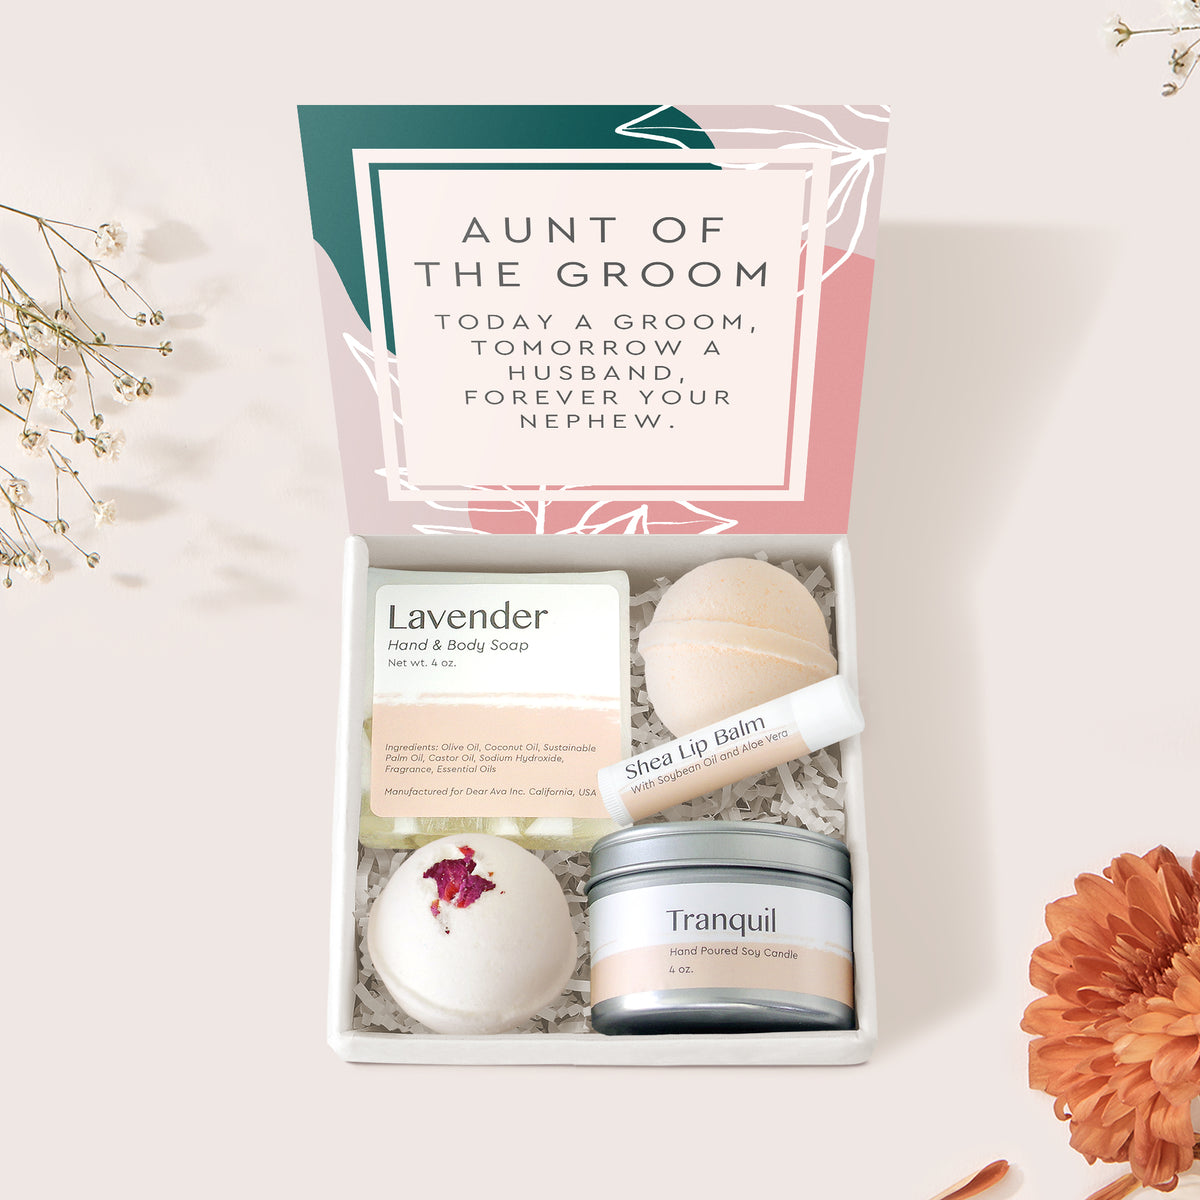 Aunt of the Groom  Spa Gift Box